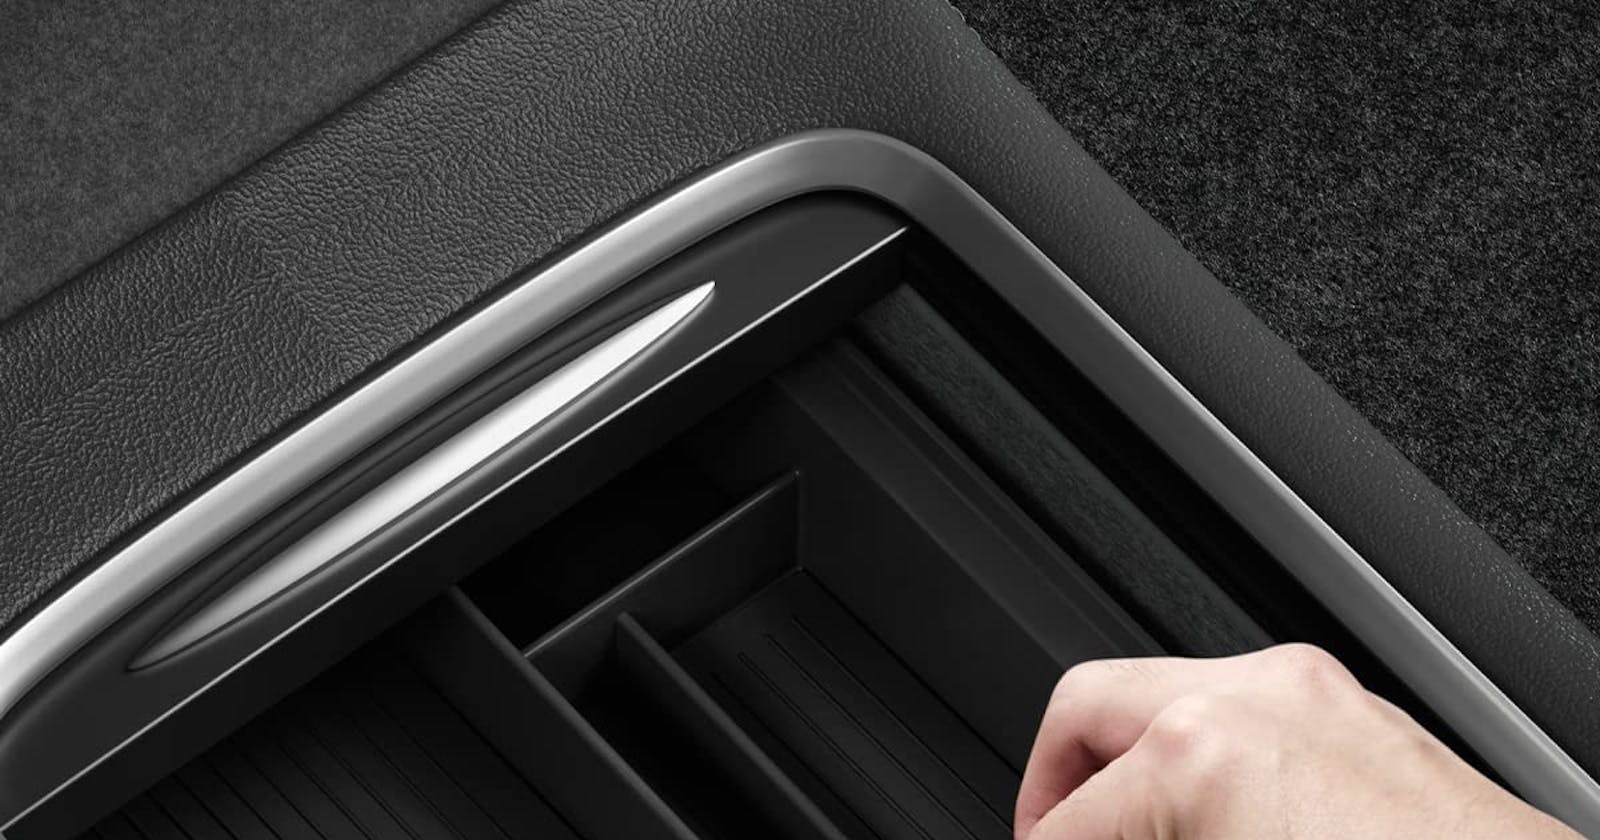 Spigen Tesla Model 3 and Model Y (2nd Gen) Center Console Organizer Tray - Carbon Edition Review